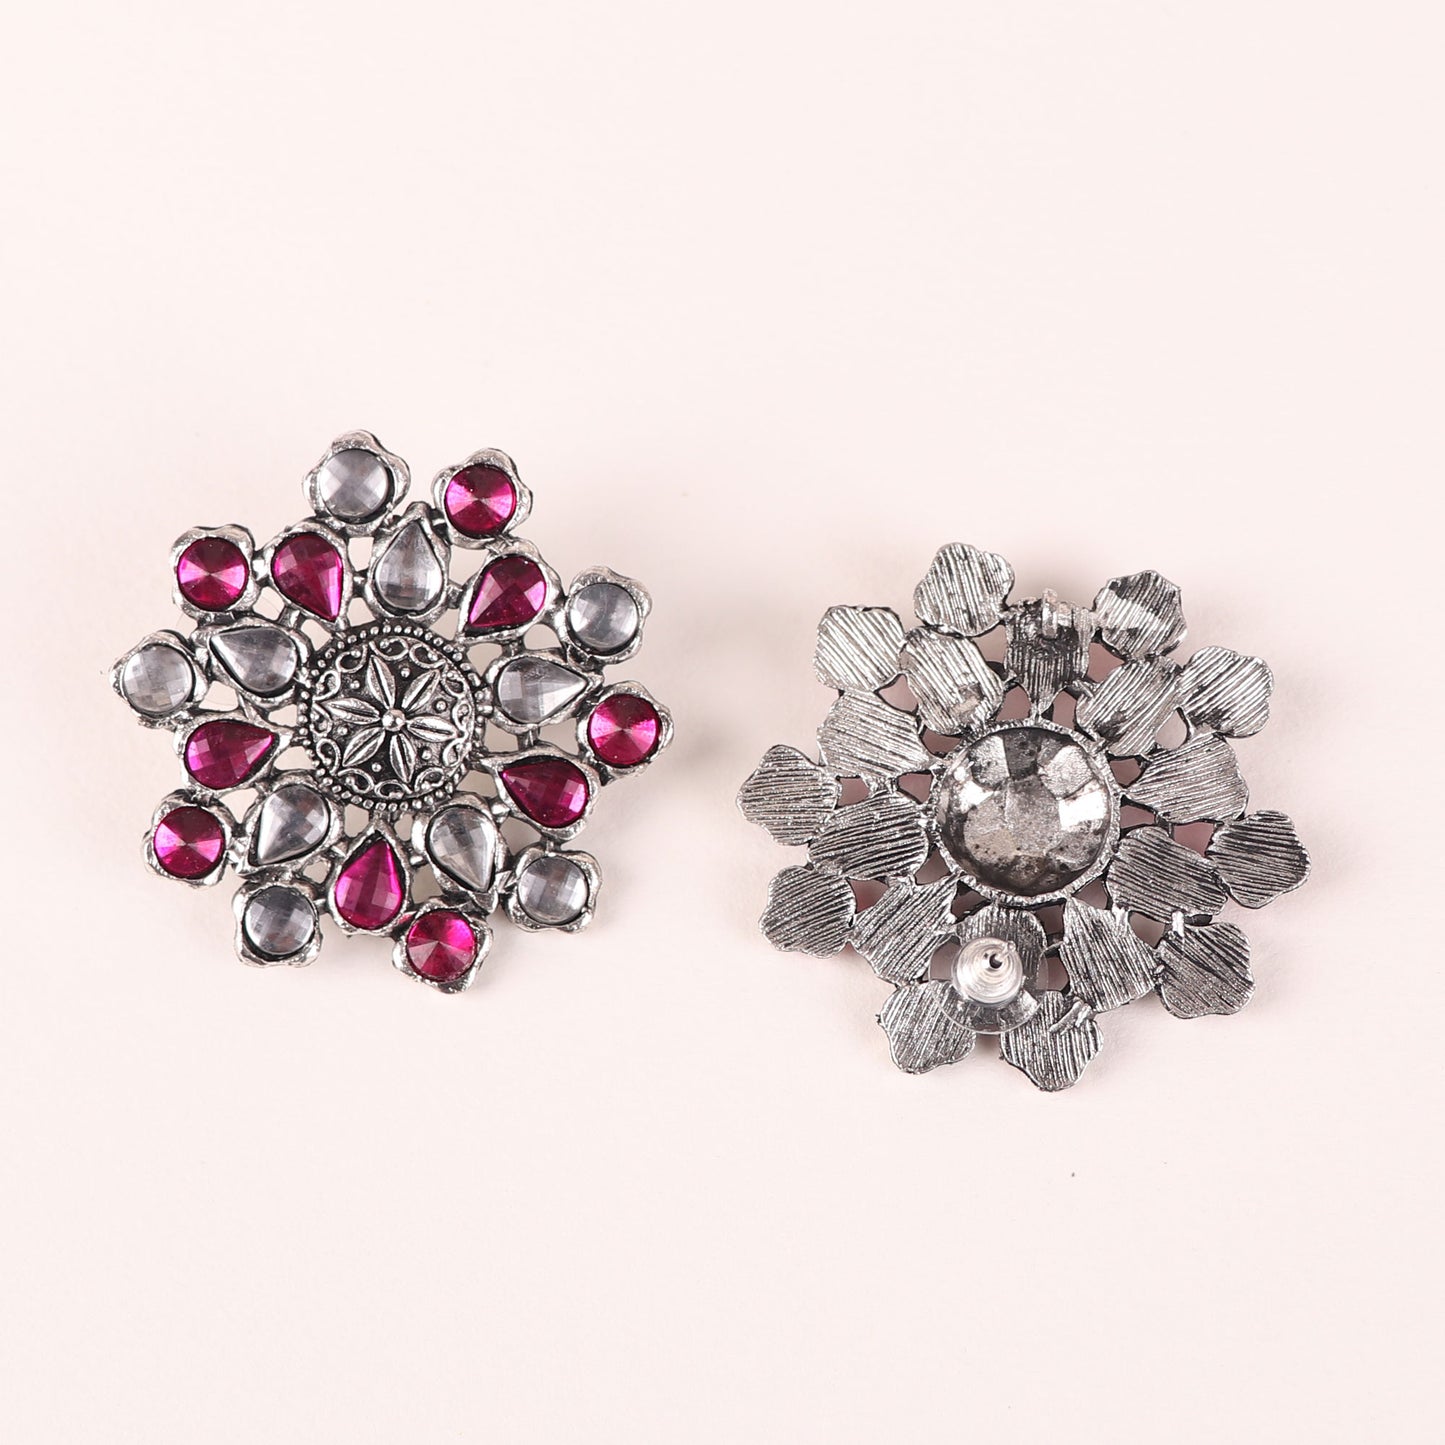 Earrings,The Pearl Hive Studs in Pink - Cippele Multi Store